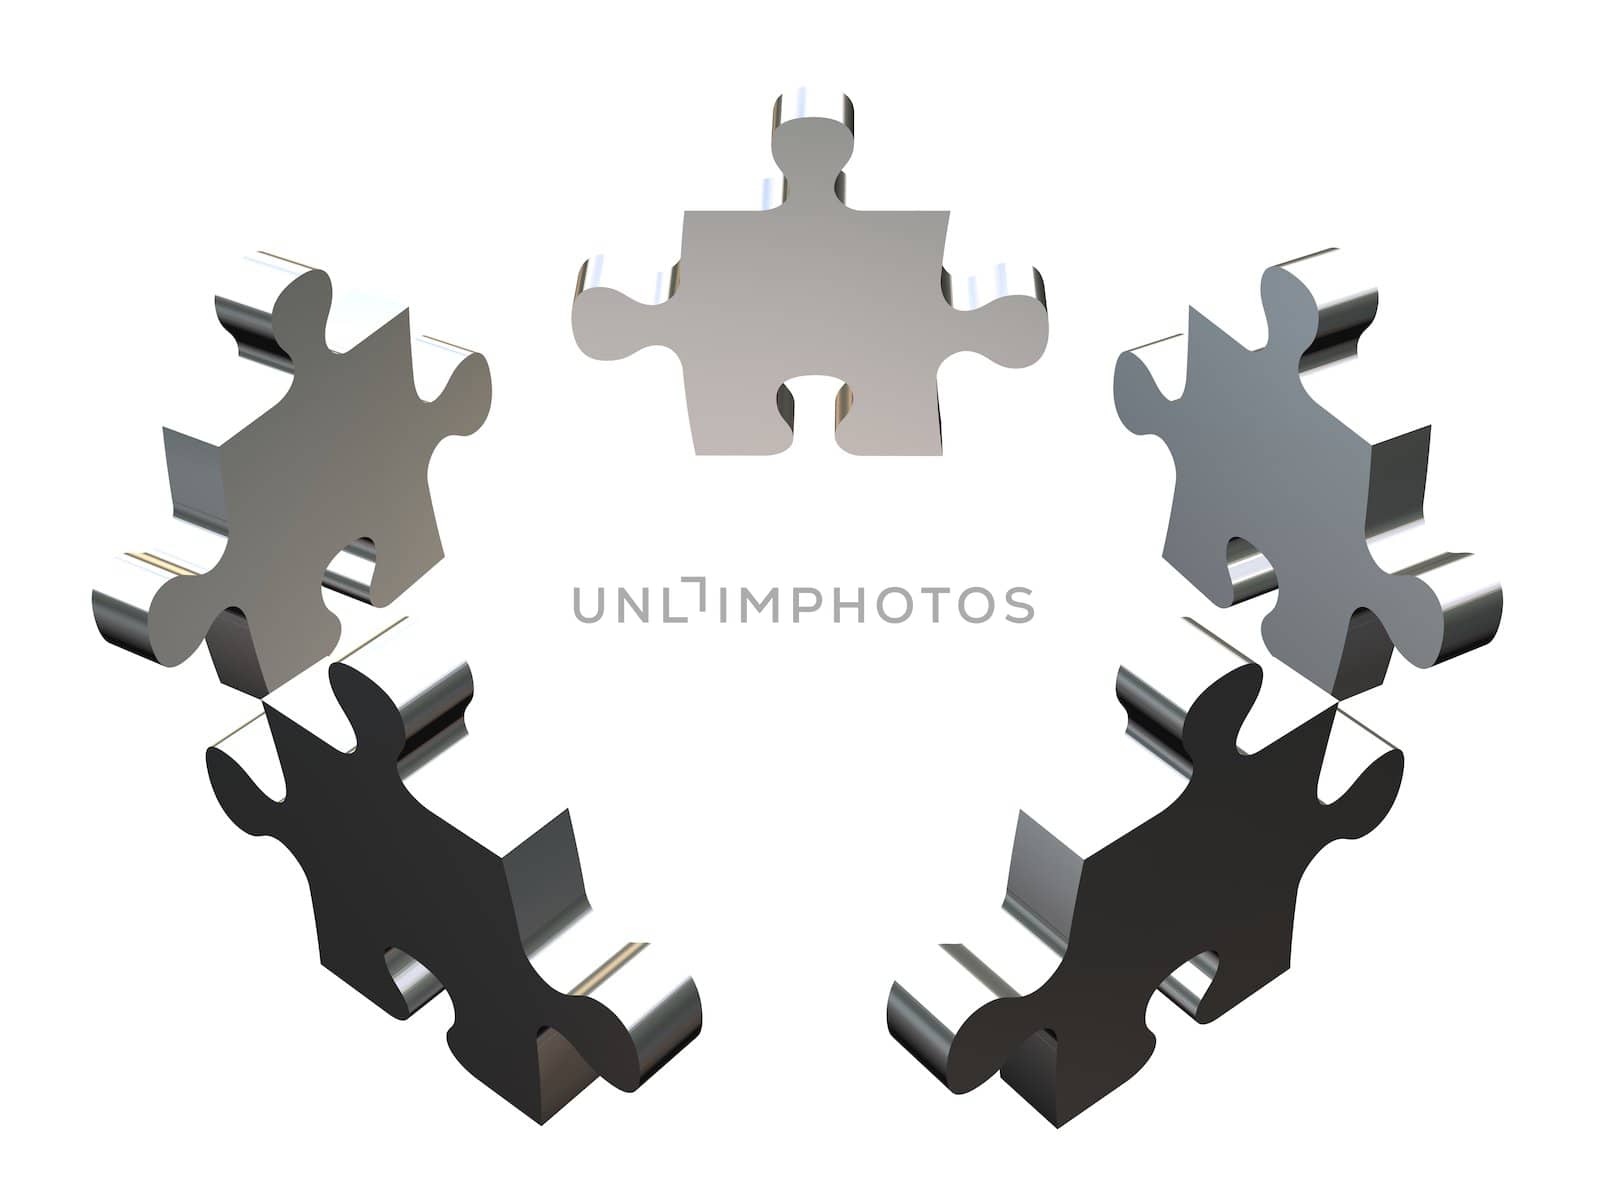 metaphoric puzzle pieces by hayaship